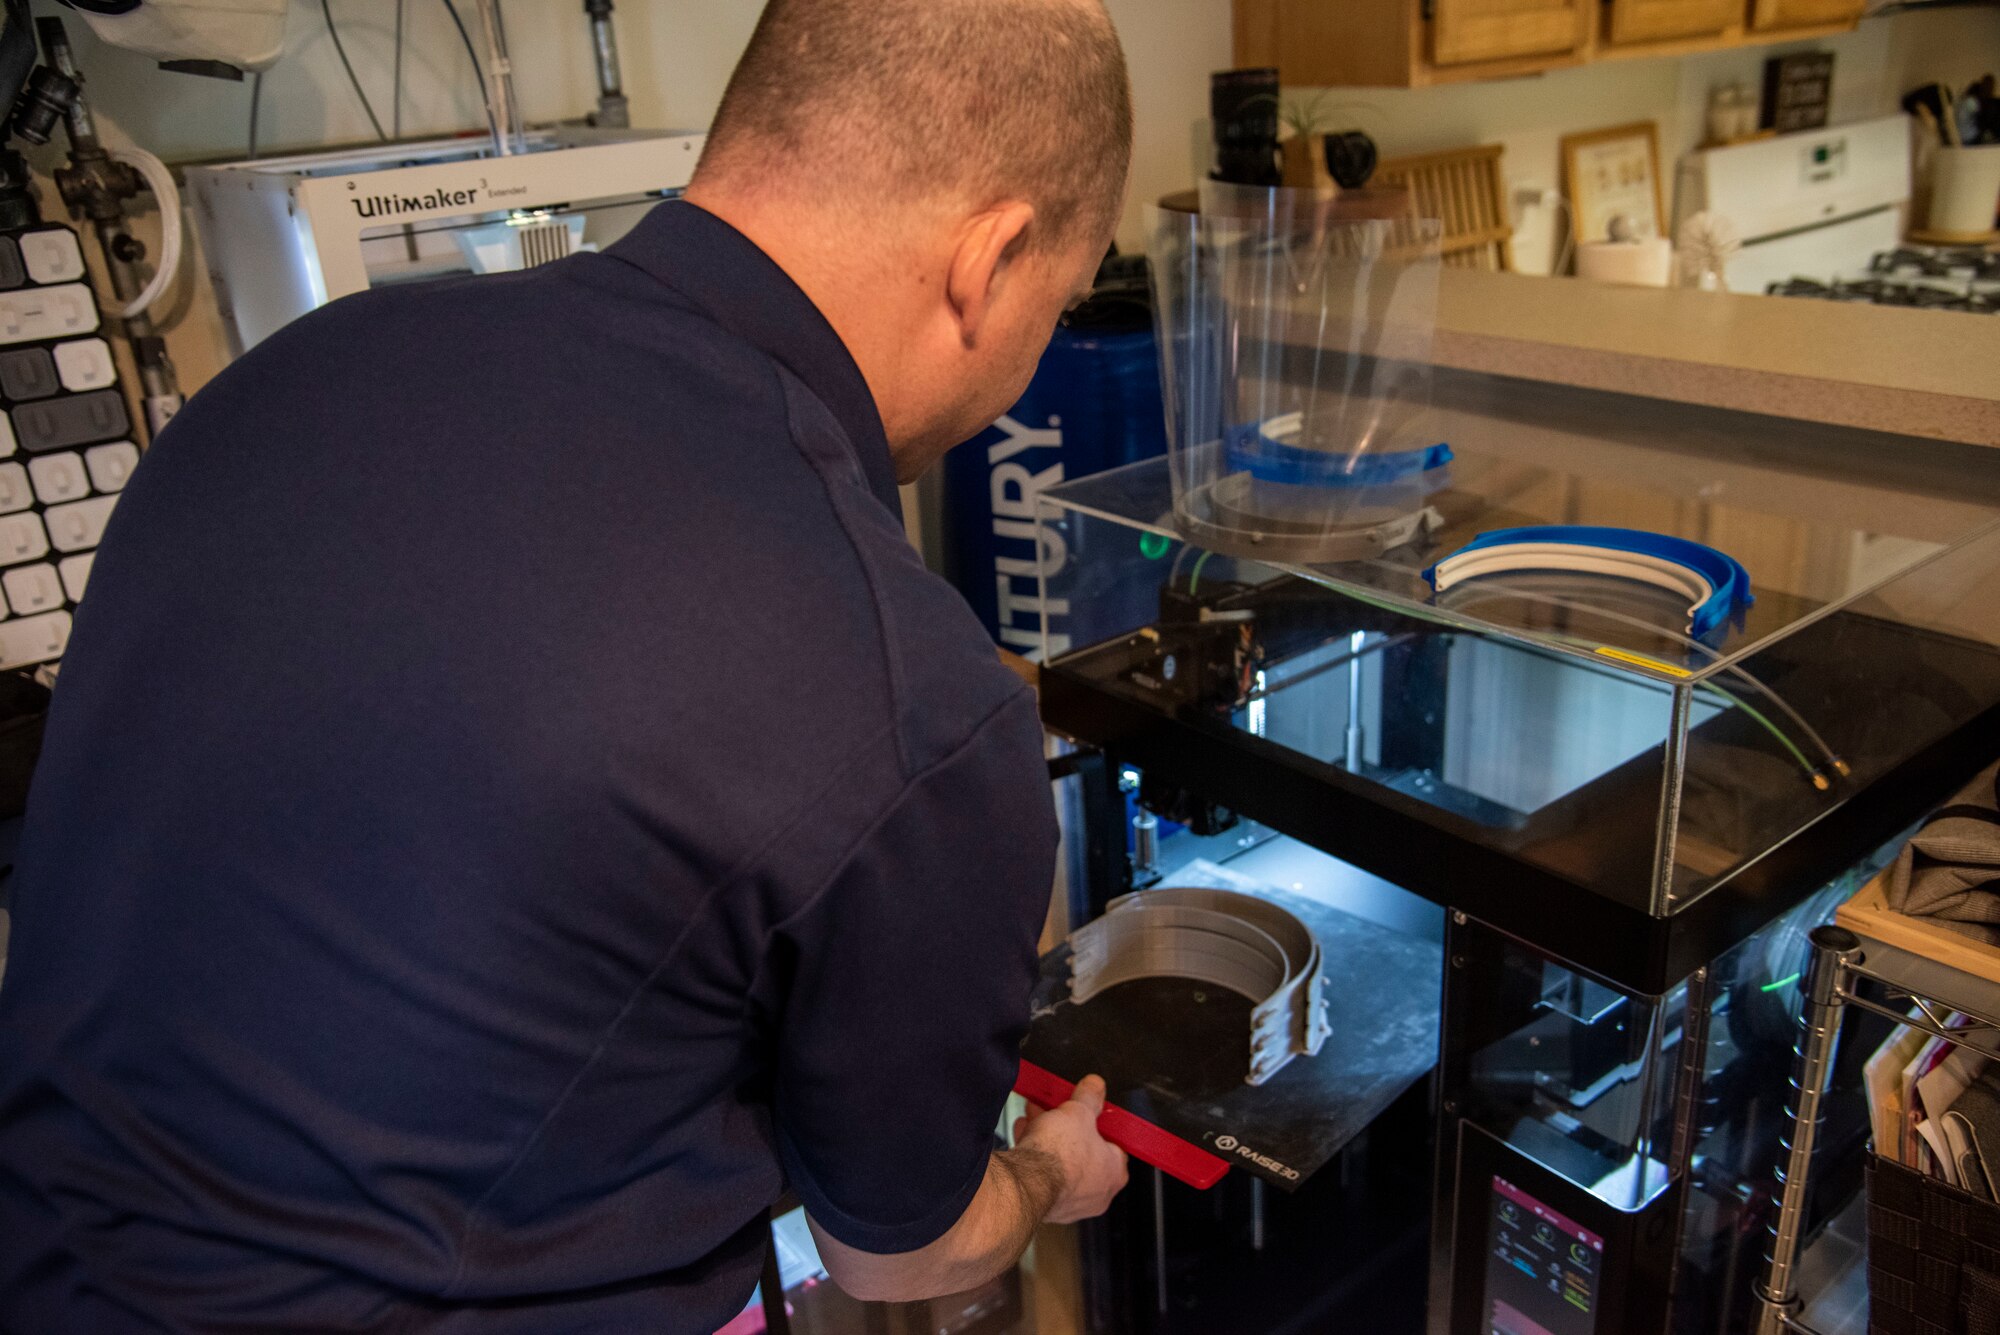 Master Sgt. Justin Pittman, innovation lab senior project manager, removes newly printed face shield headbands from a 3D printer April 7, 2020, at Dover Air Force Base, Del. The face shields were printed by the 436th Airlift Wing Innovation Lab "Bedrock" for use by medical and security forces personnel supporting COVID-19 response efforts. (U.S. Air Force photo by Airman 1st Class Jonathan Harding)